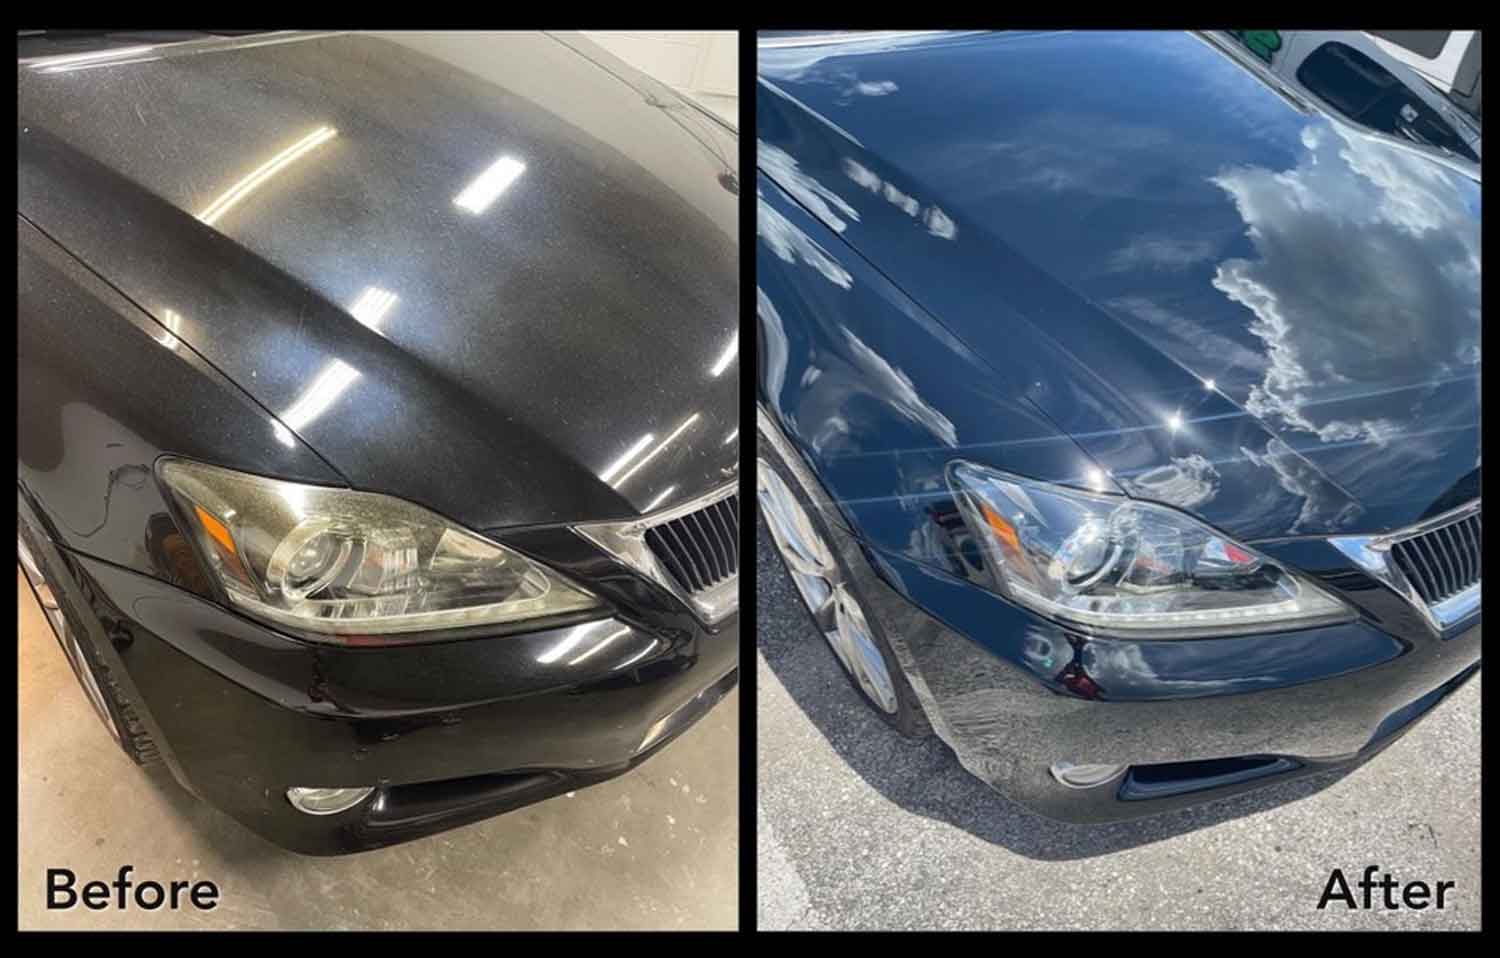 Collage of a black Lexus parked outside with pictures of before and after RestorFX application has been performed